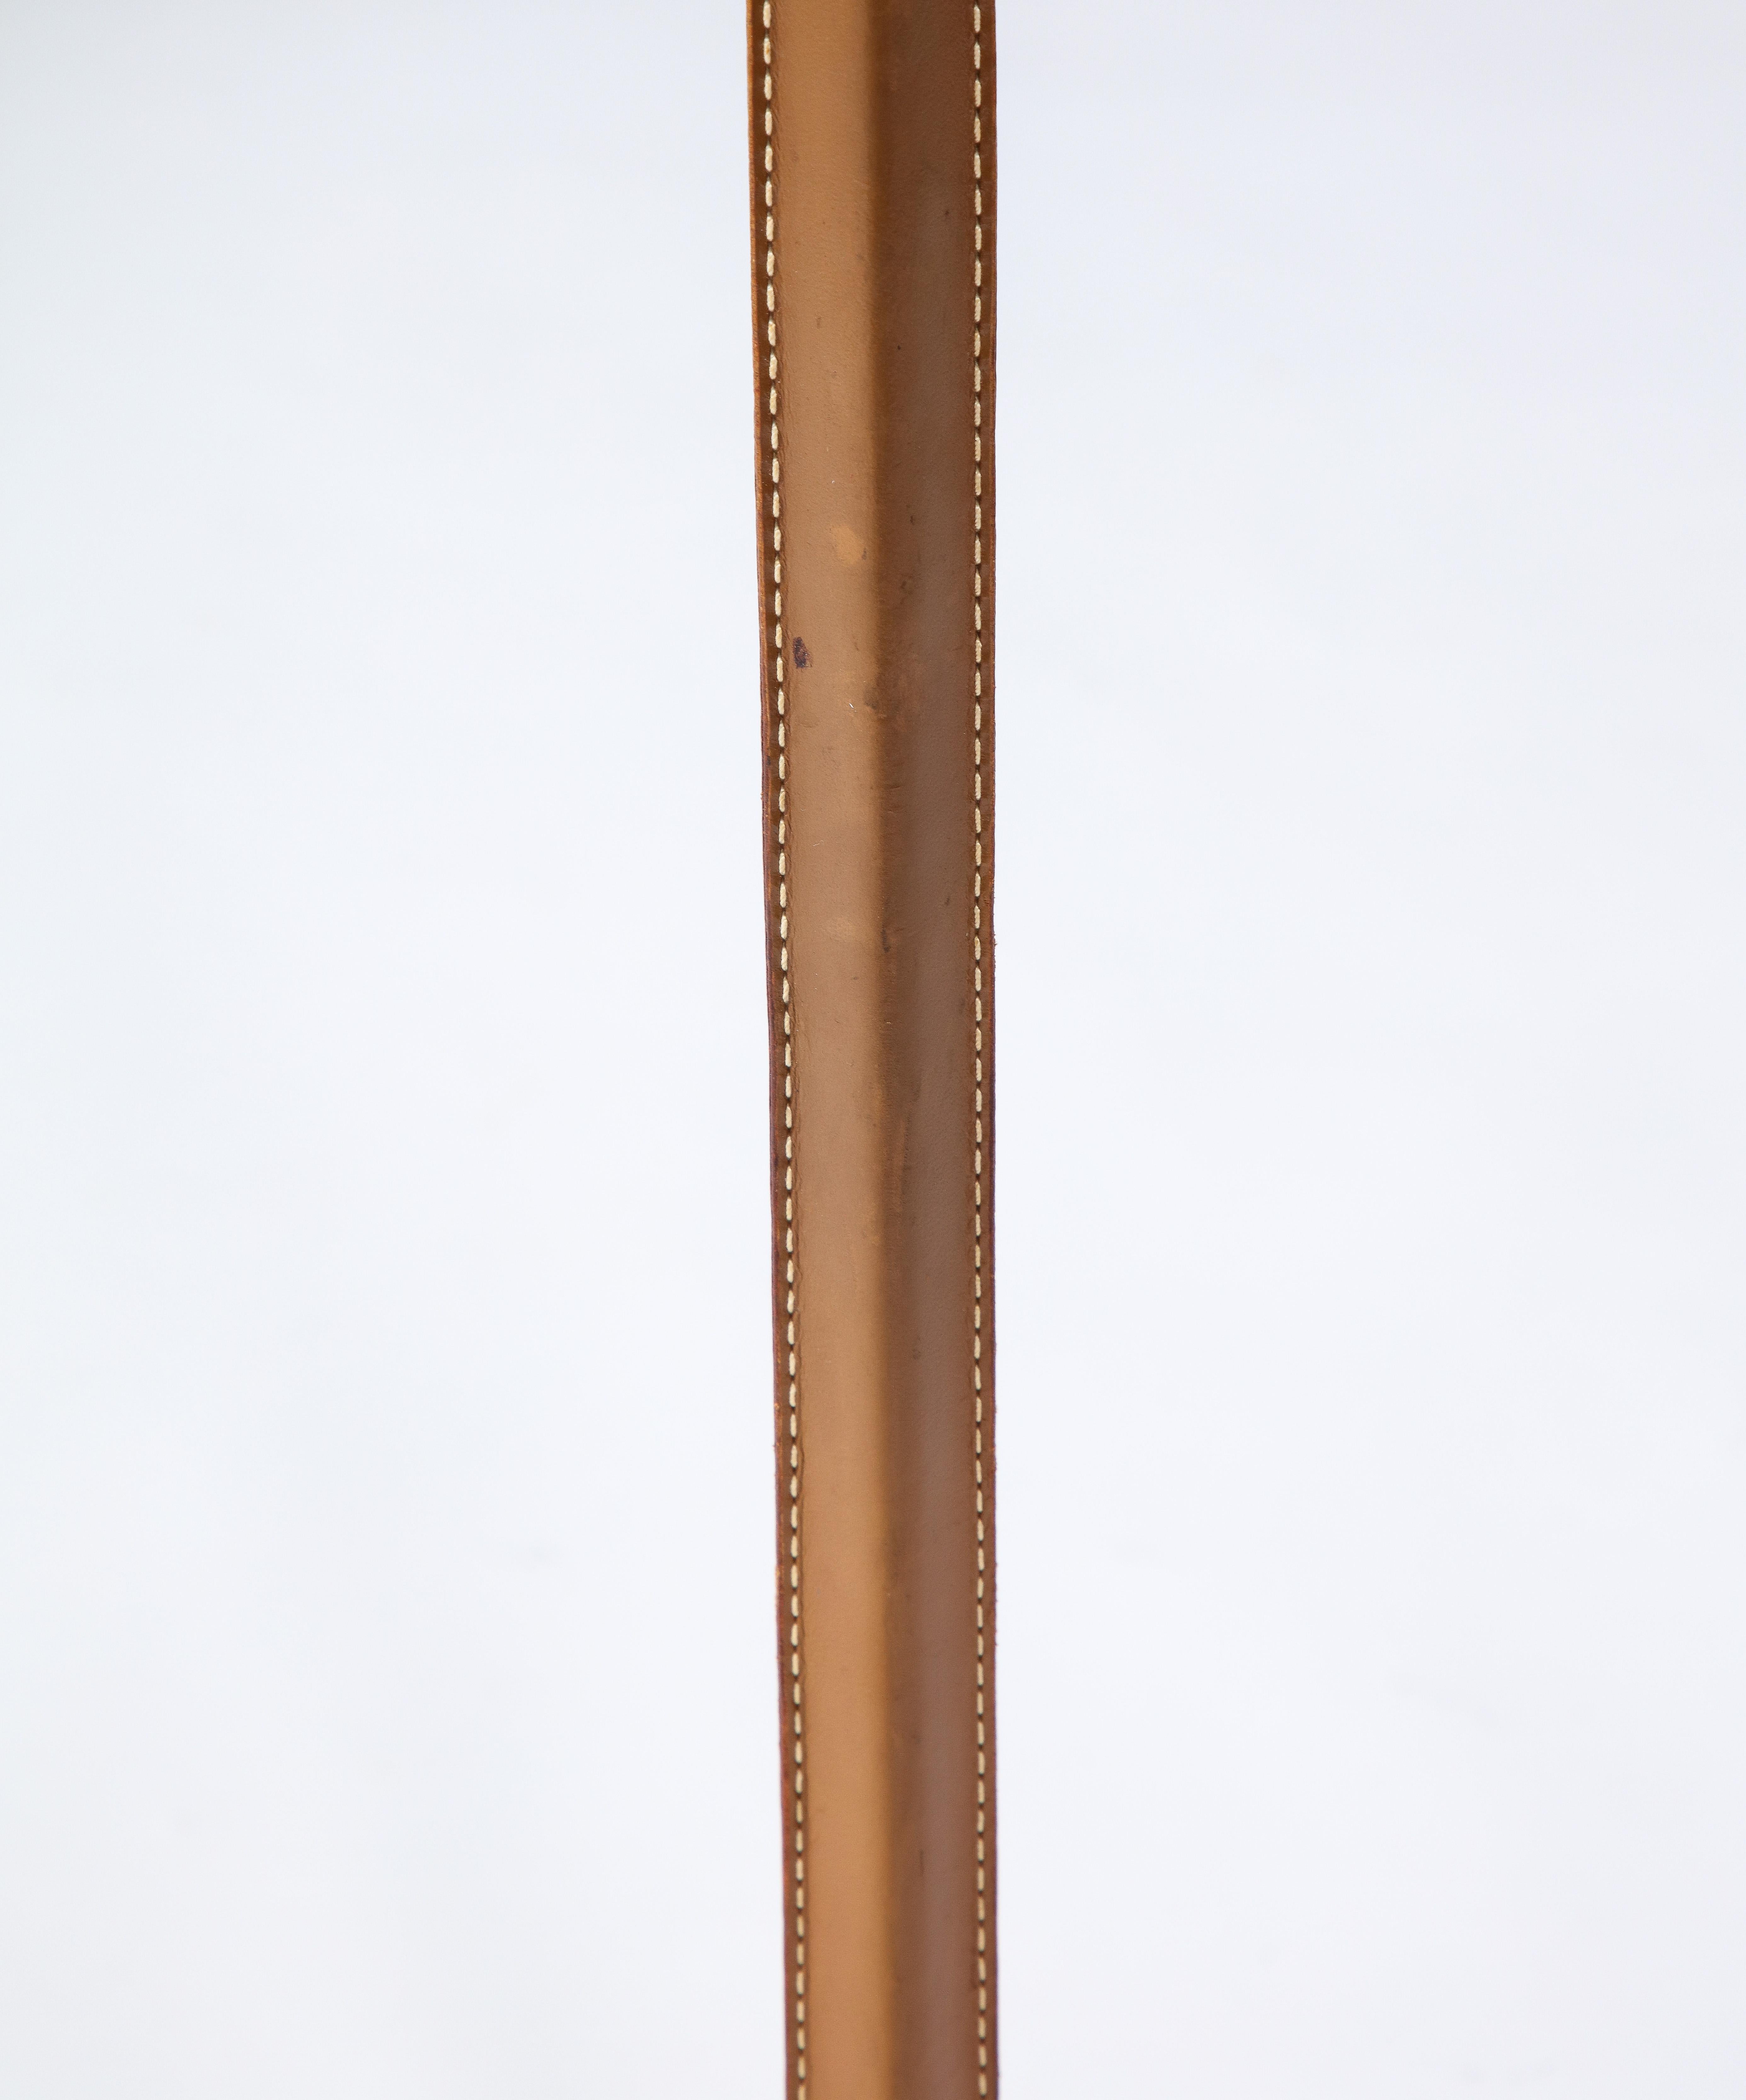 Brass and Leather Floor Lamp by Falkenbergs Belysning, Sweden, c. 1950 For Sale 5